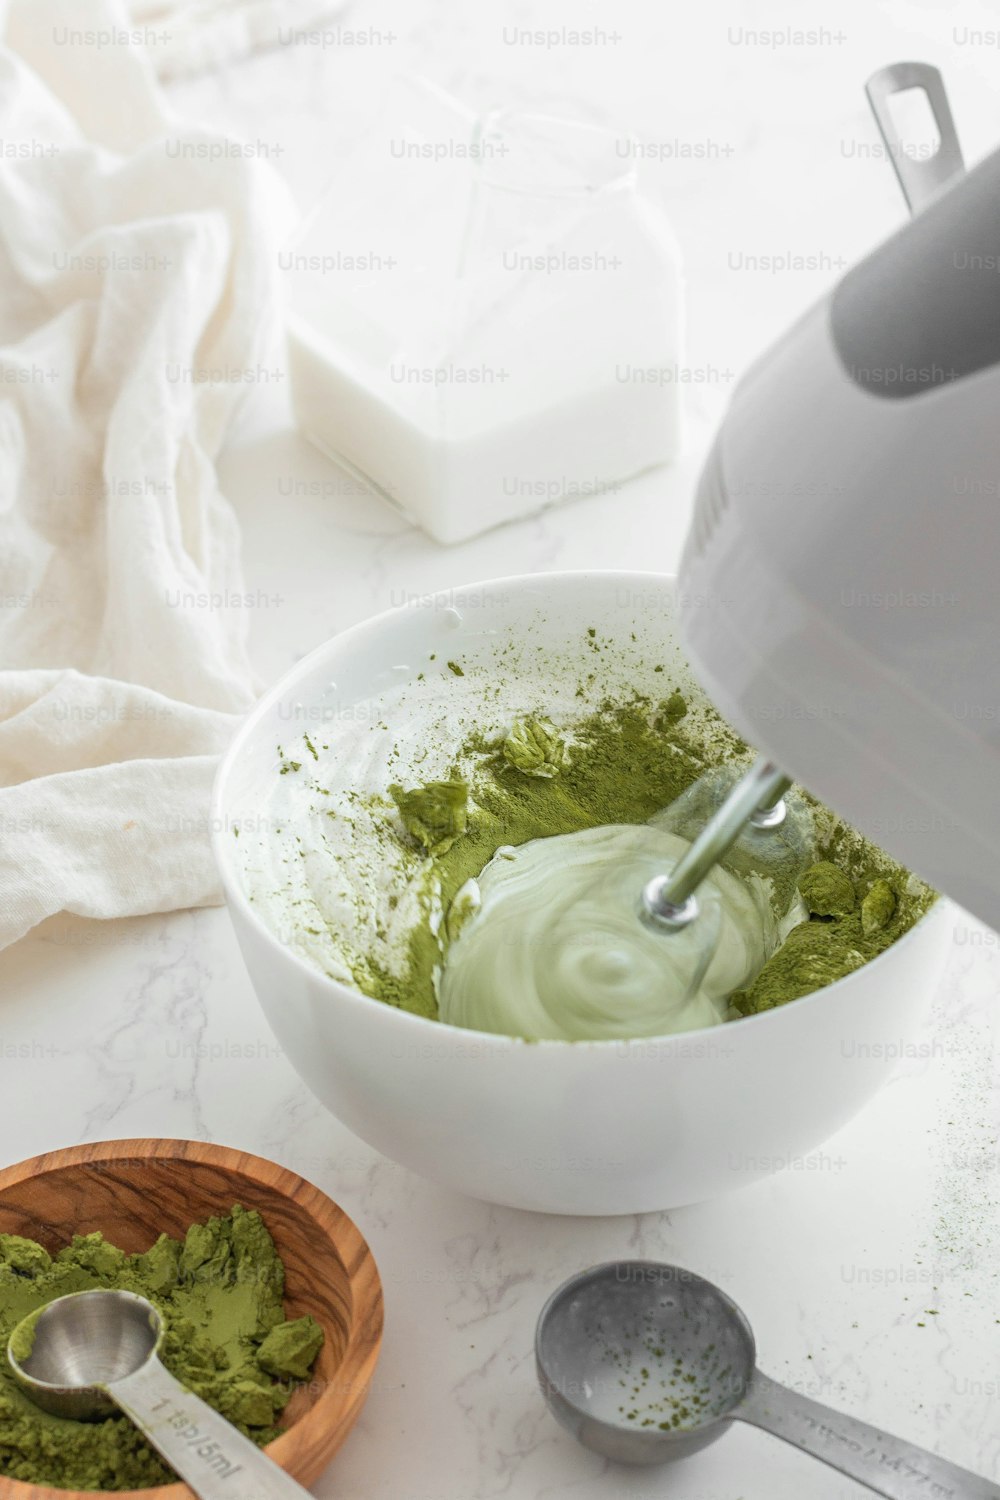 a bowl filled with green powder next to a spoon